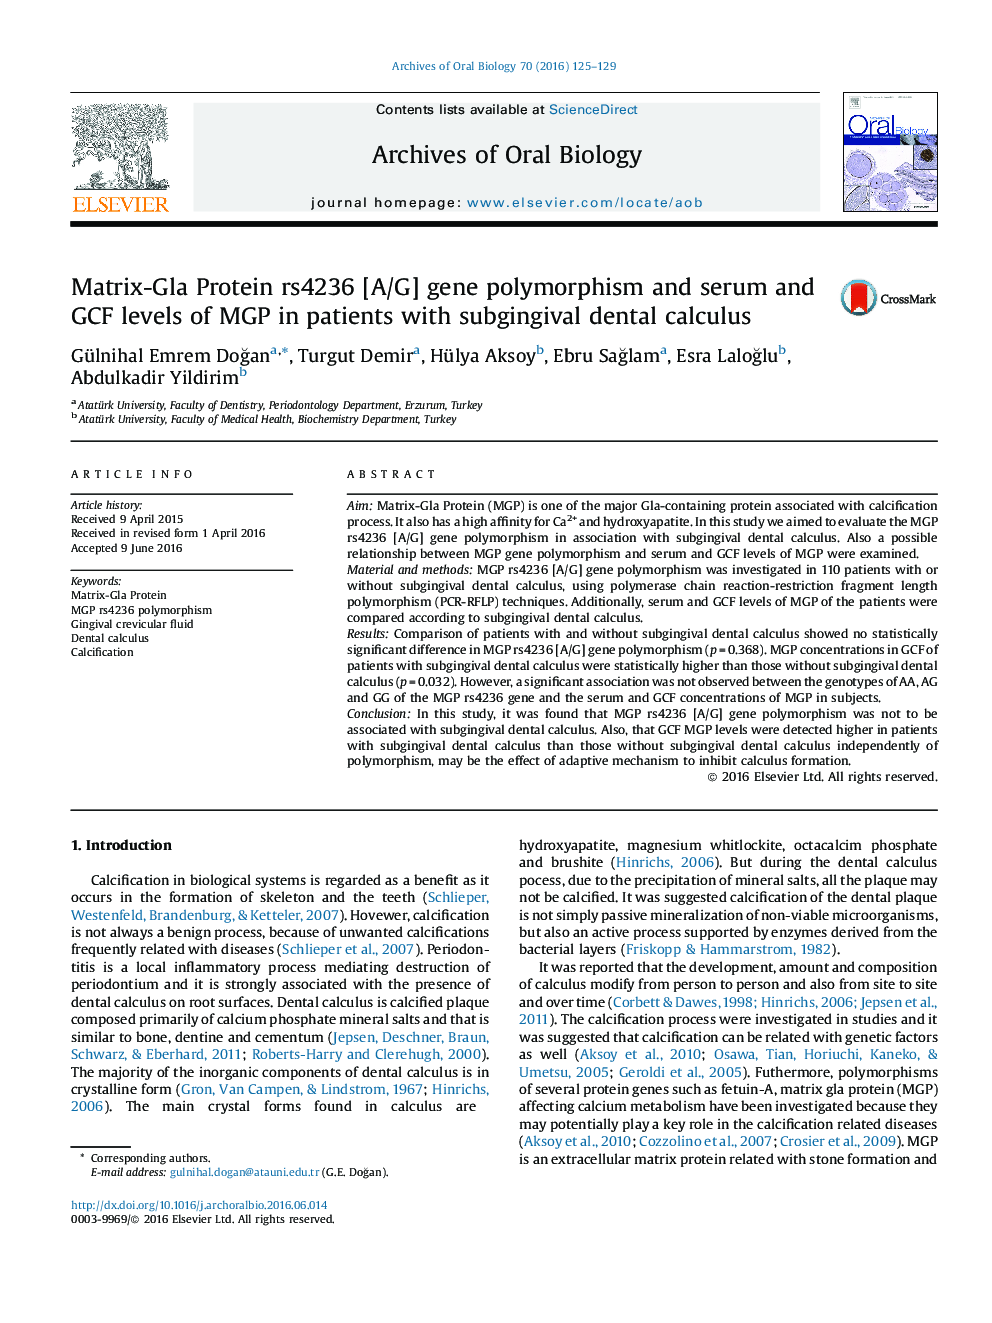 Matrix-Gla Protein rs4236 [A/G] gene polymorphism and serum and GCF levels of MGP in patients with subgingival dental calculus